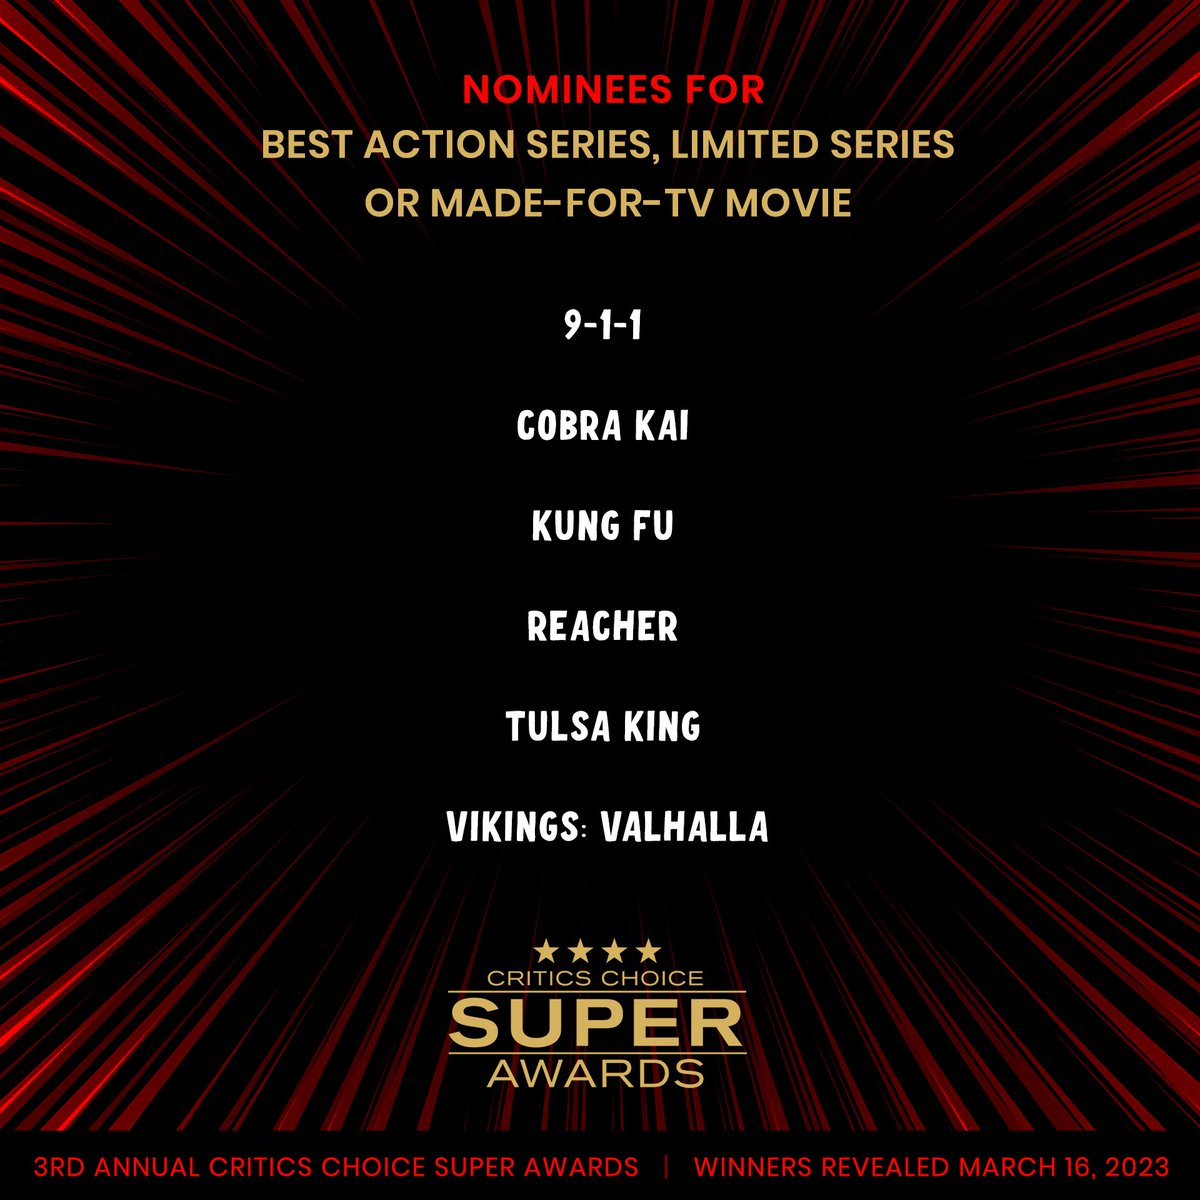 Congratulations to the Critics Choice Super Awards Nominees for BEST ACTION SERIES, LIMITED SERIES OR MADE-FOR-TV MOVIE: #911 @CobraKaiSeries @cw_kungfu #Reacher @TulsaKing #VikingsValhalla 3rd Annual #CriticsChoice #SuperAwards winners announced 3/16 criticschoice.com